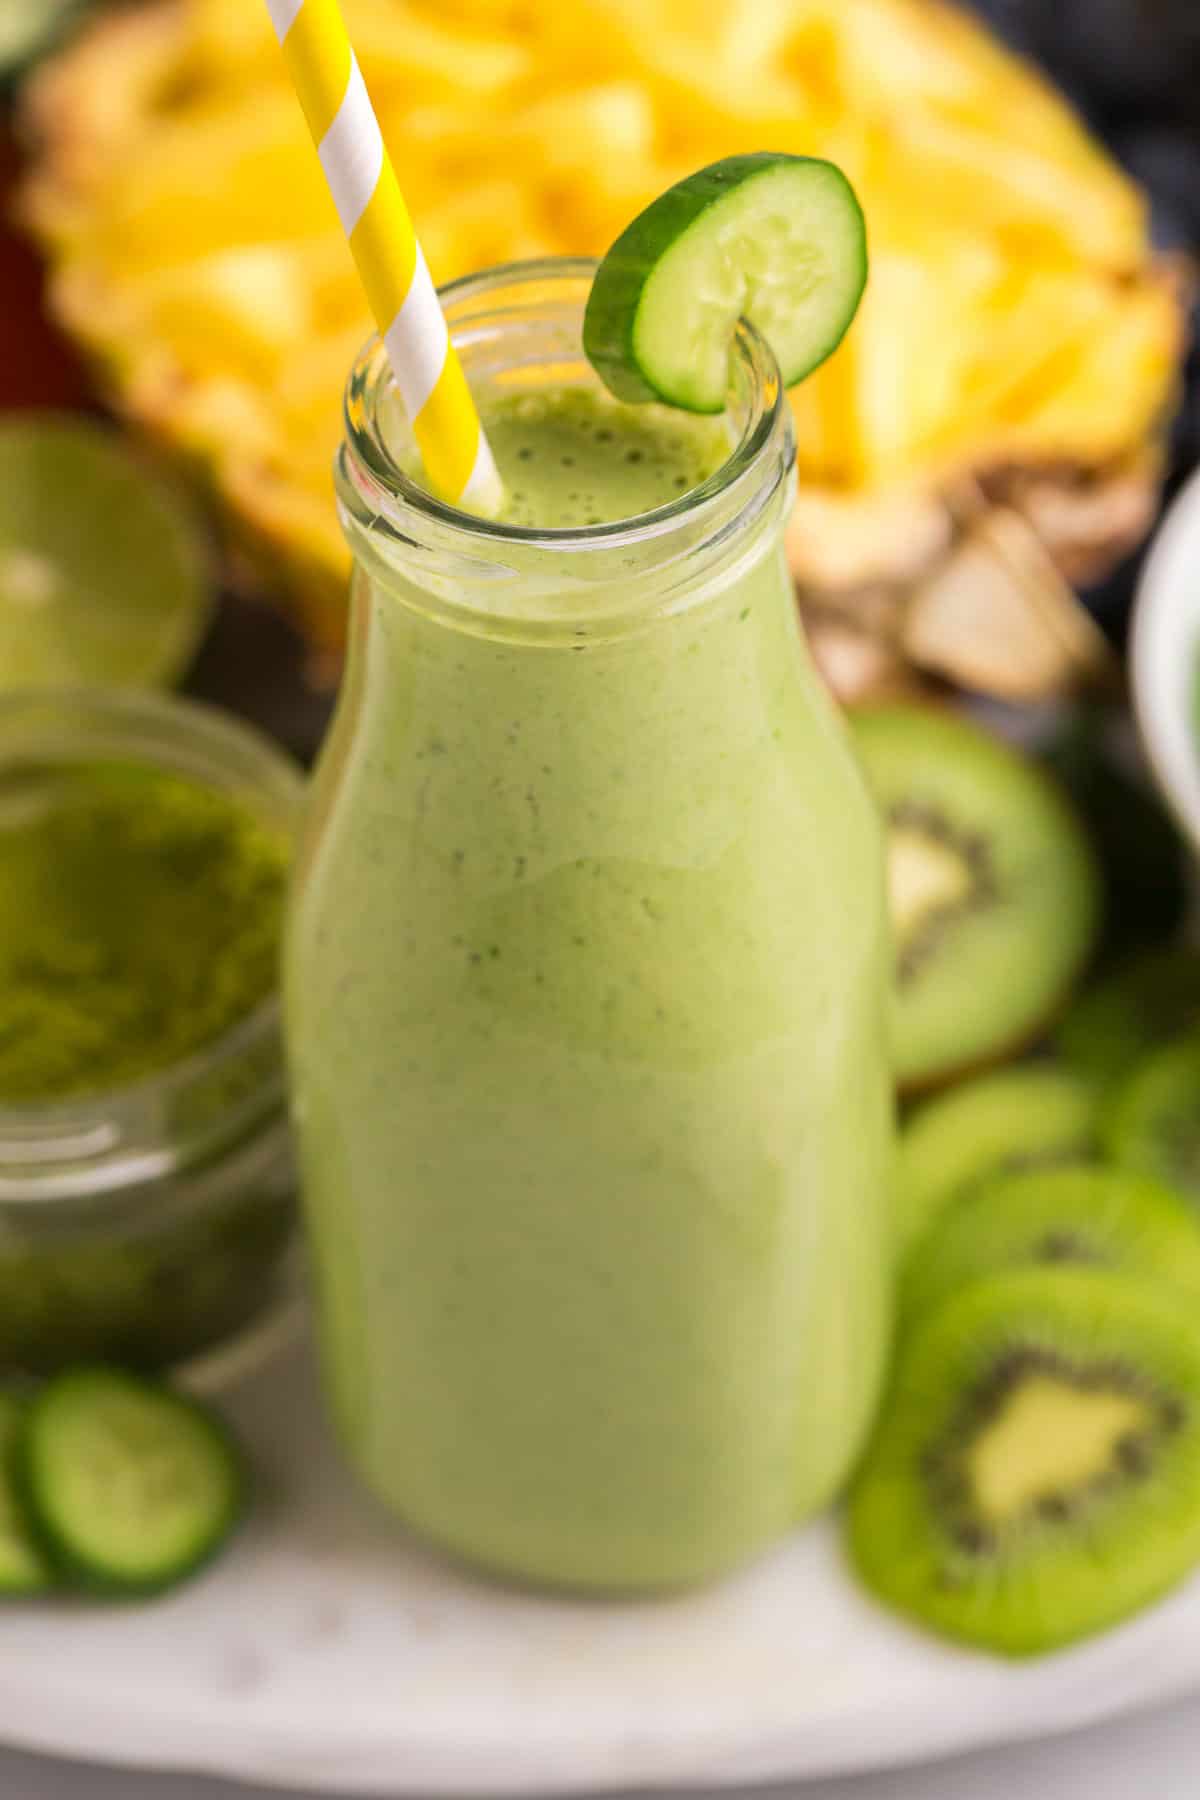 Close up of green smoothie with a yellow and white straw.